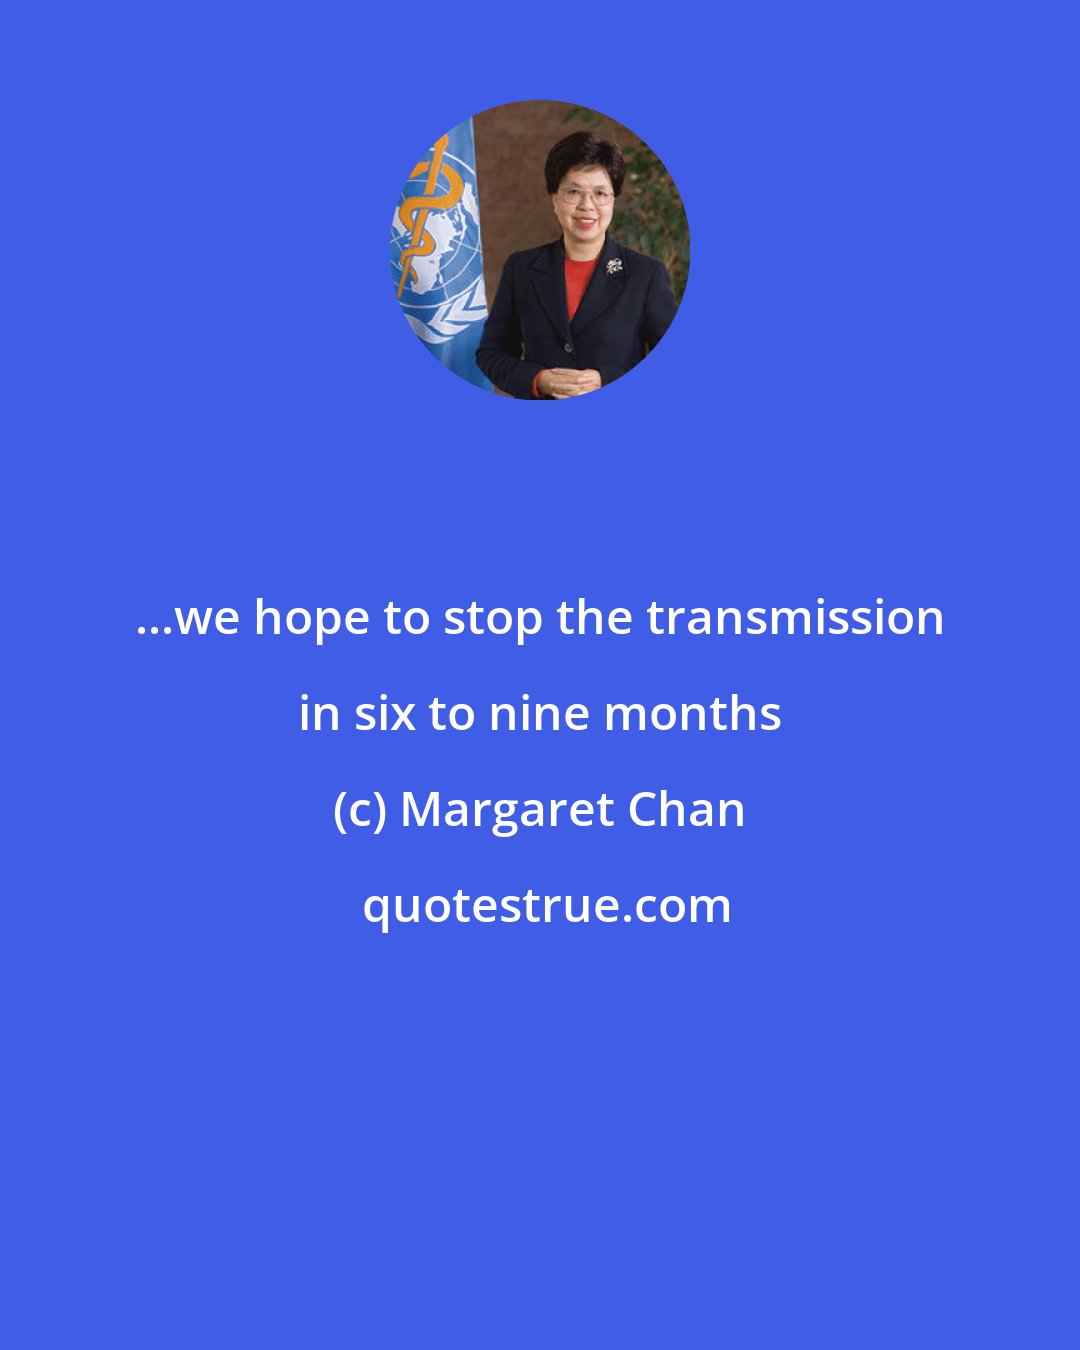 Margaret Chan: ...we hope to stop the transmission in six to nine months